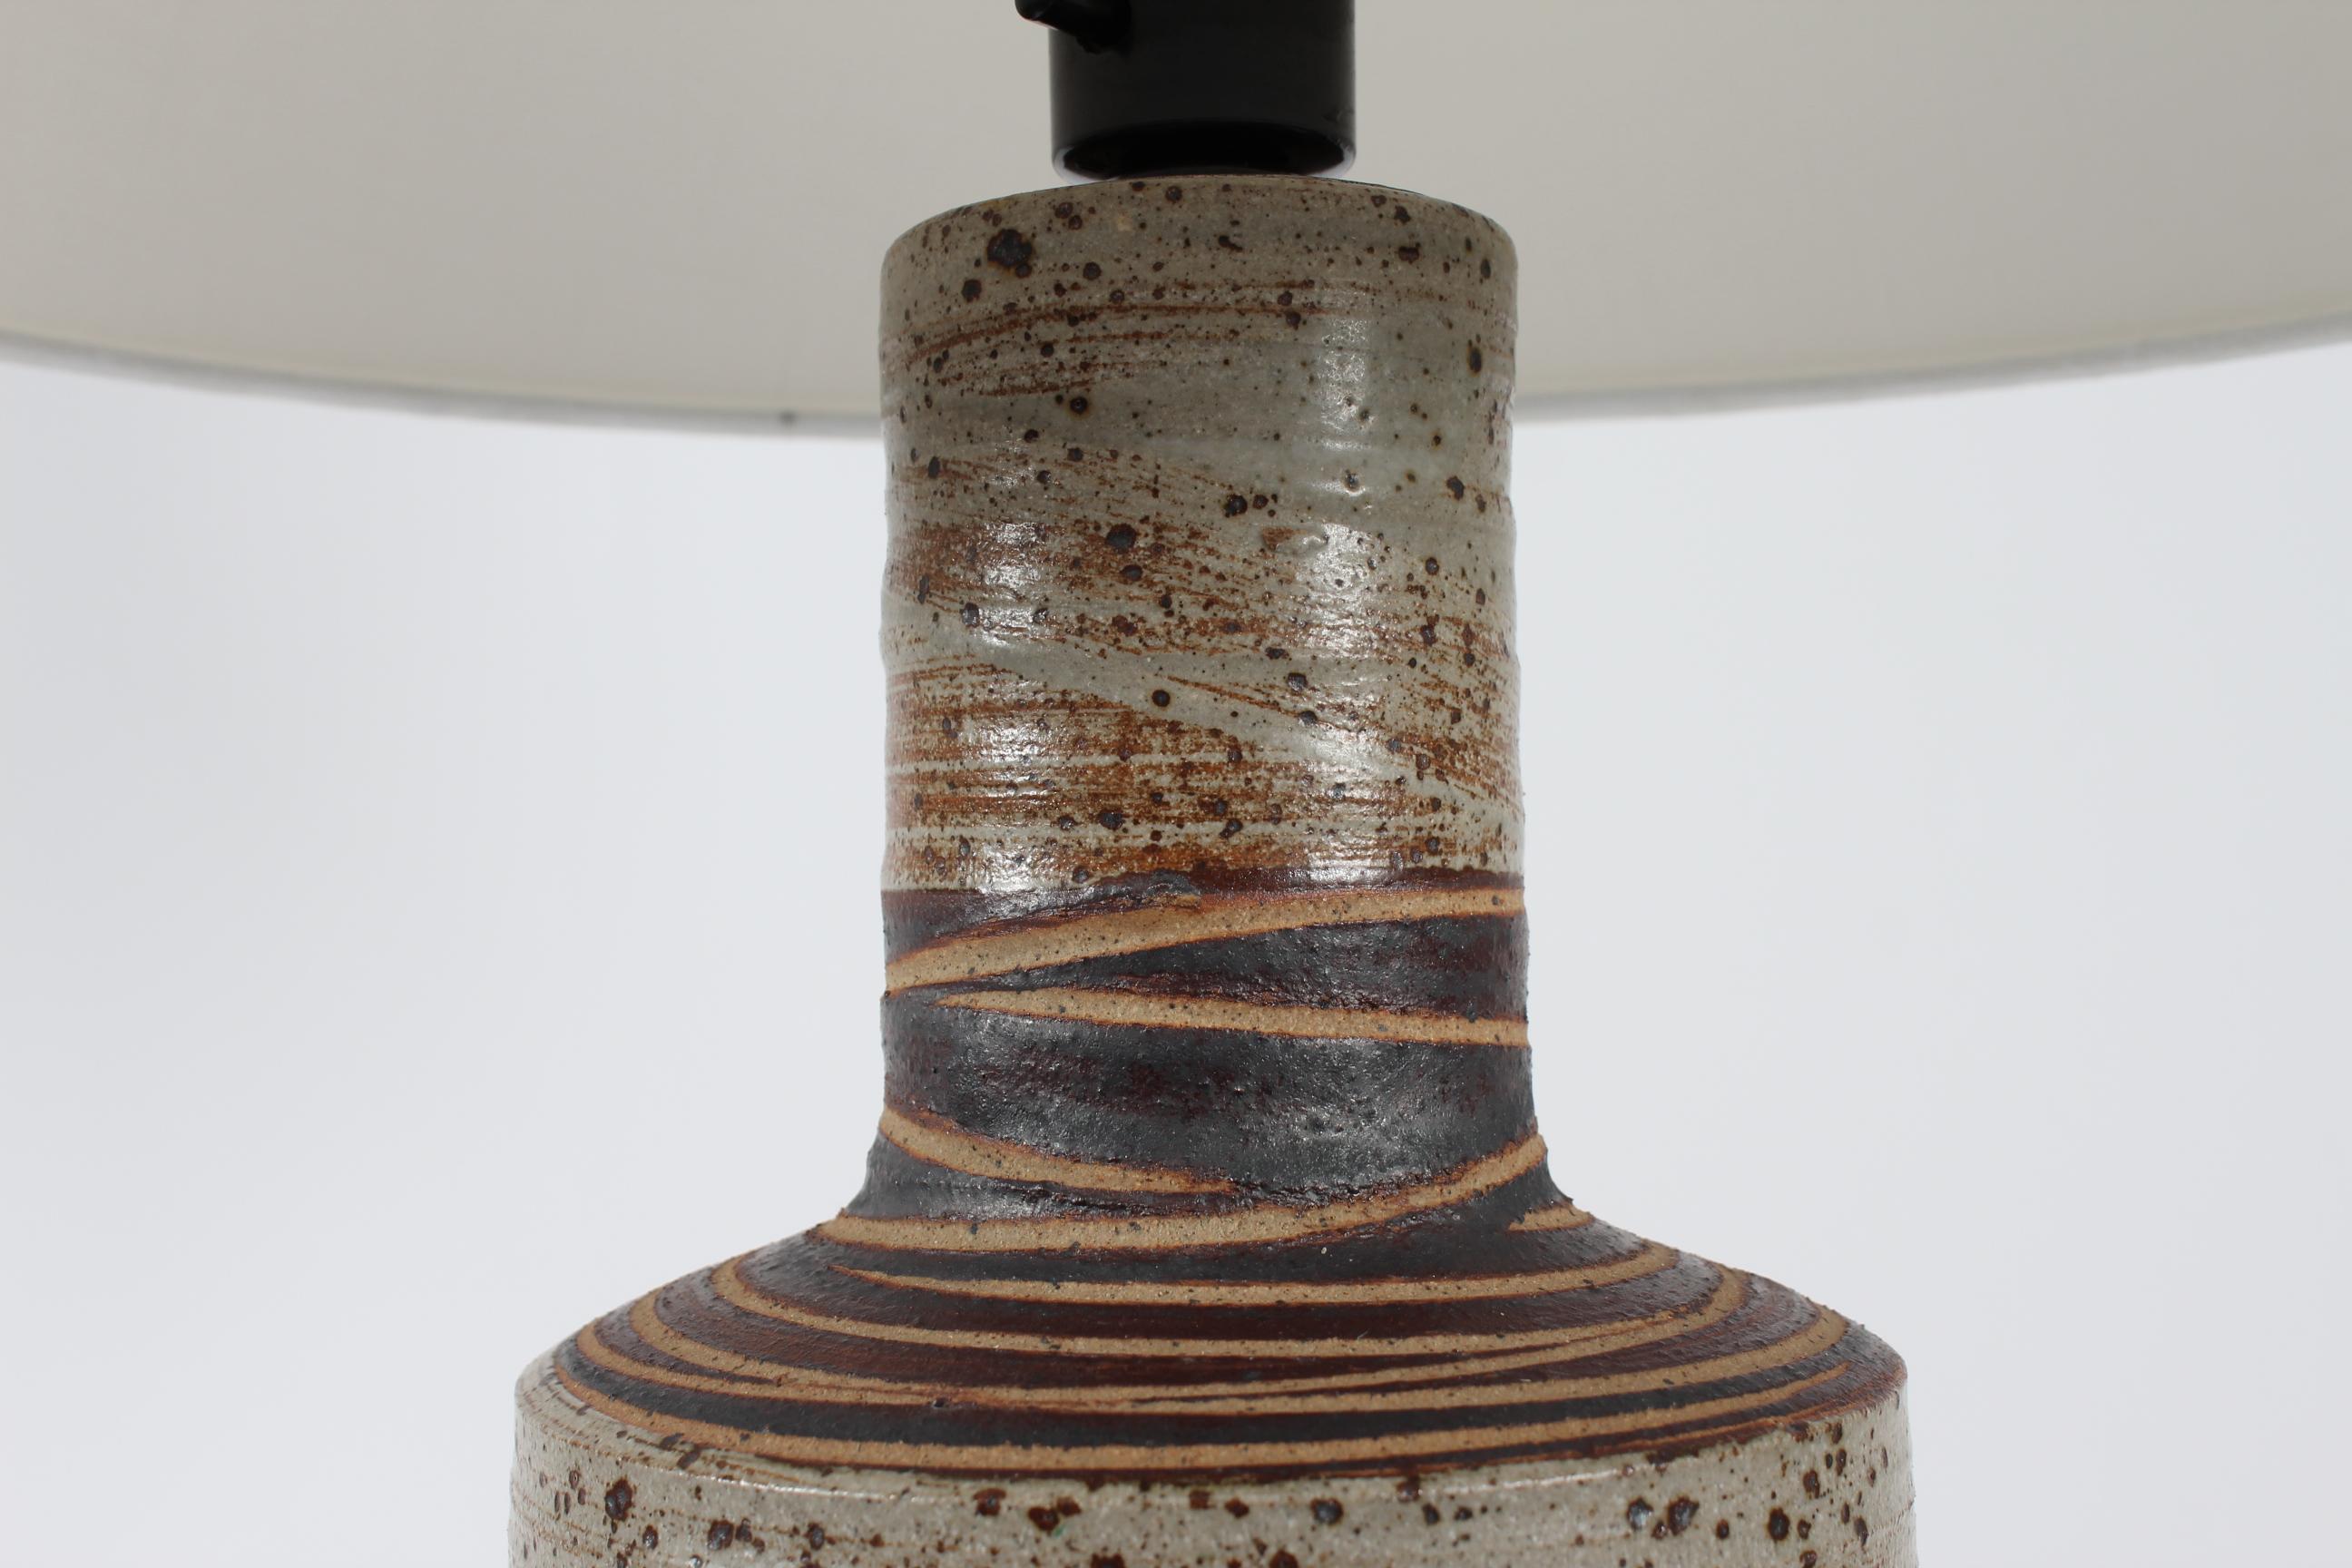 Huge tall rustic table lamp by Danish ceramist Tue Poulsen (born 1939). Made ca. 1970s in Tue Poulsen´s own studio.
The base is made of chamotte clay and is decorated in earthen colours on a beige background

Stamped TUE Denmark

Included is a new